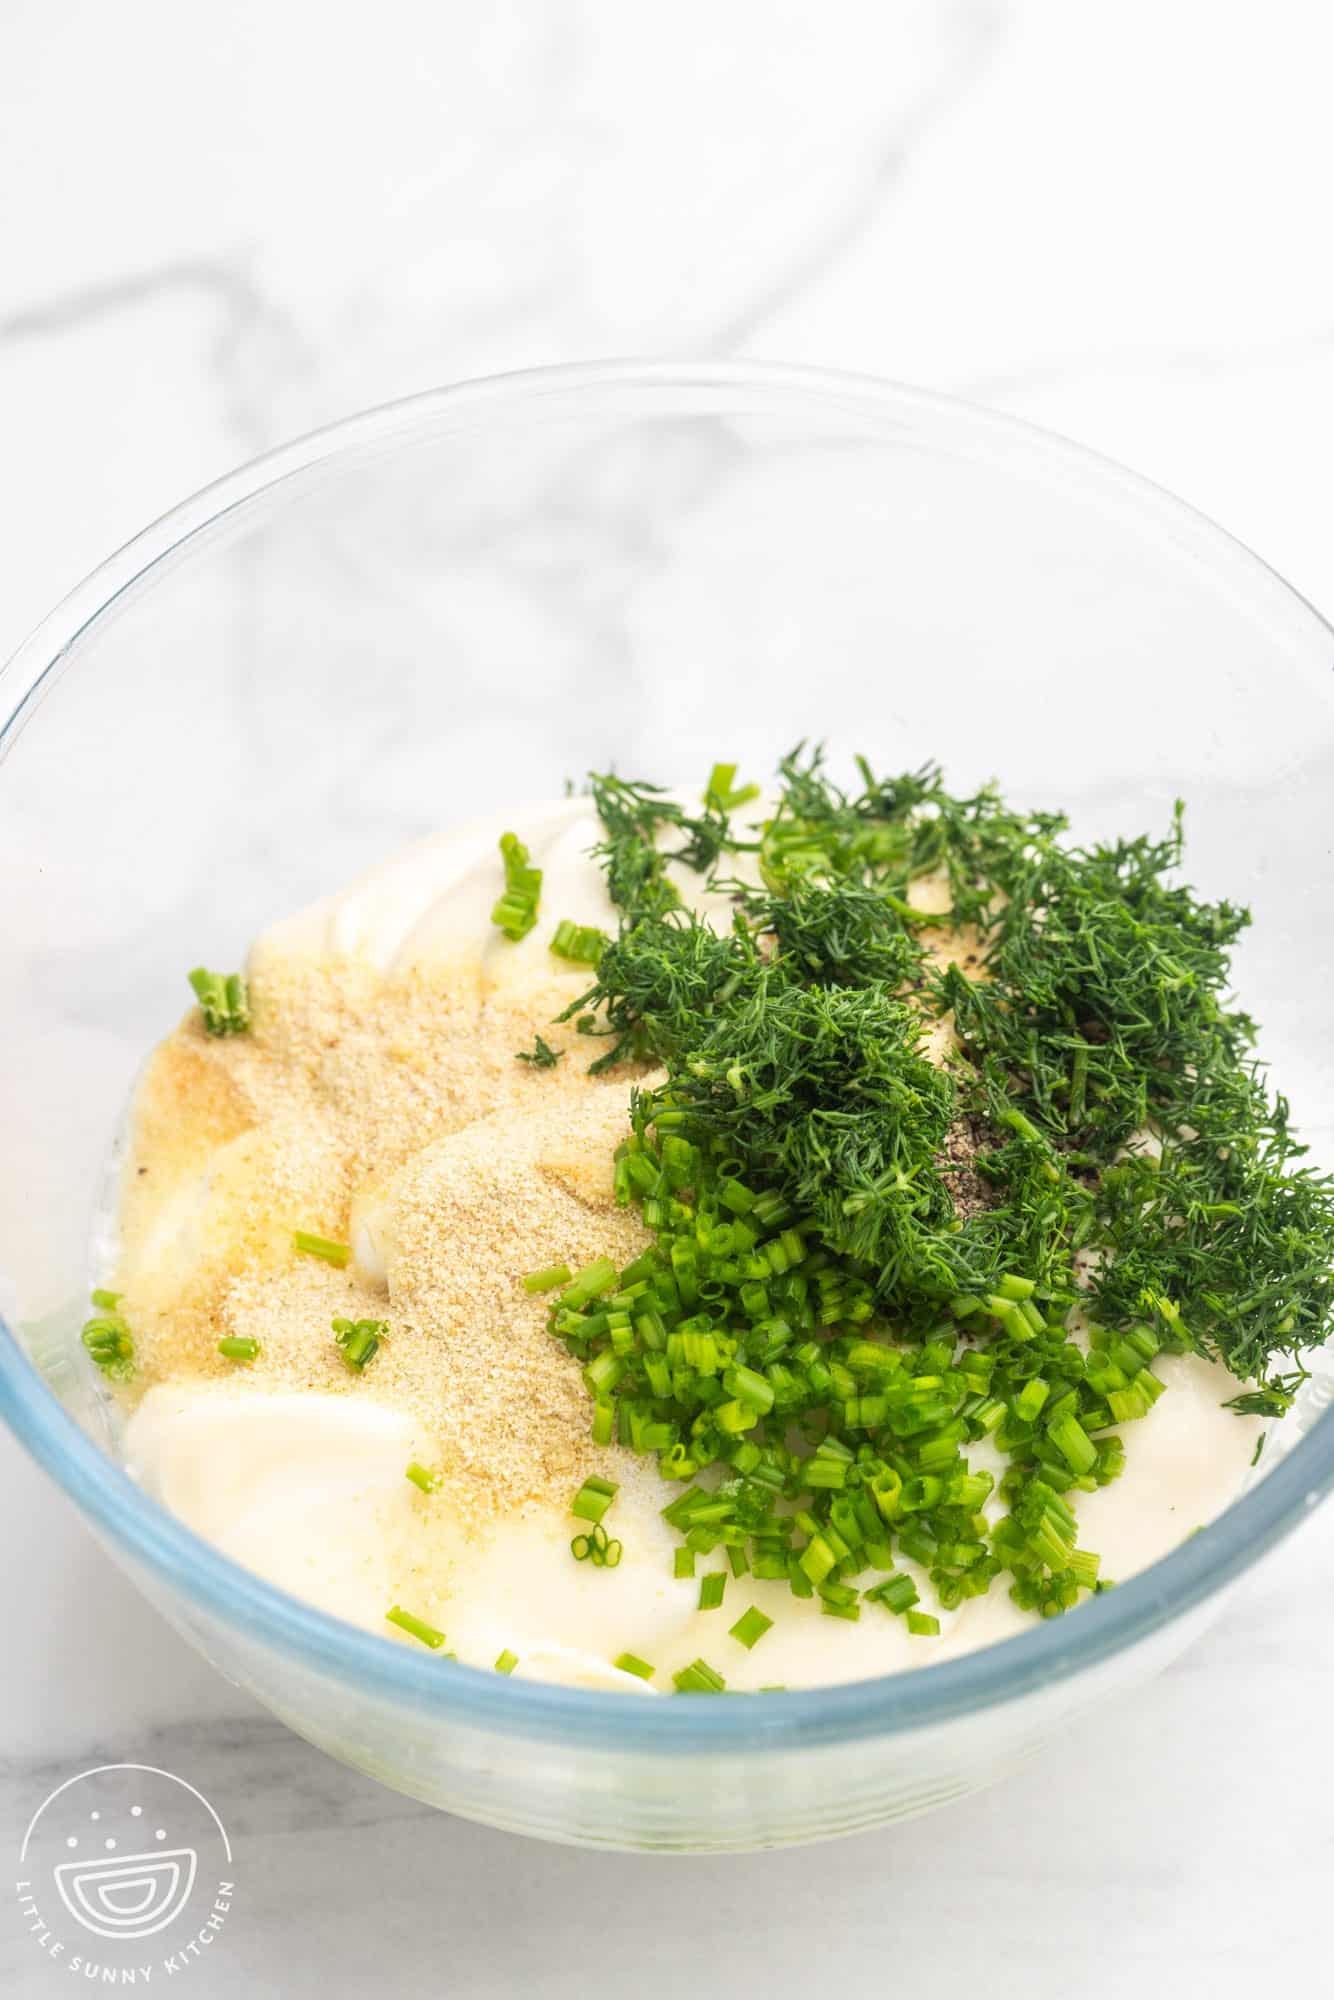 sour cream, mayo, herbs and seasonings in a glass mixing bowl.